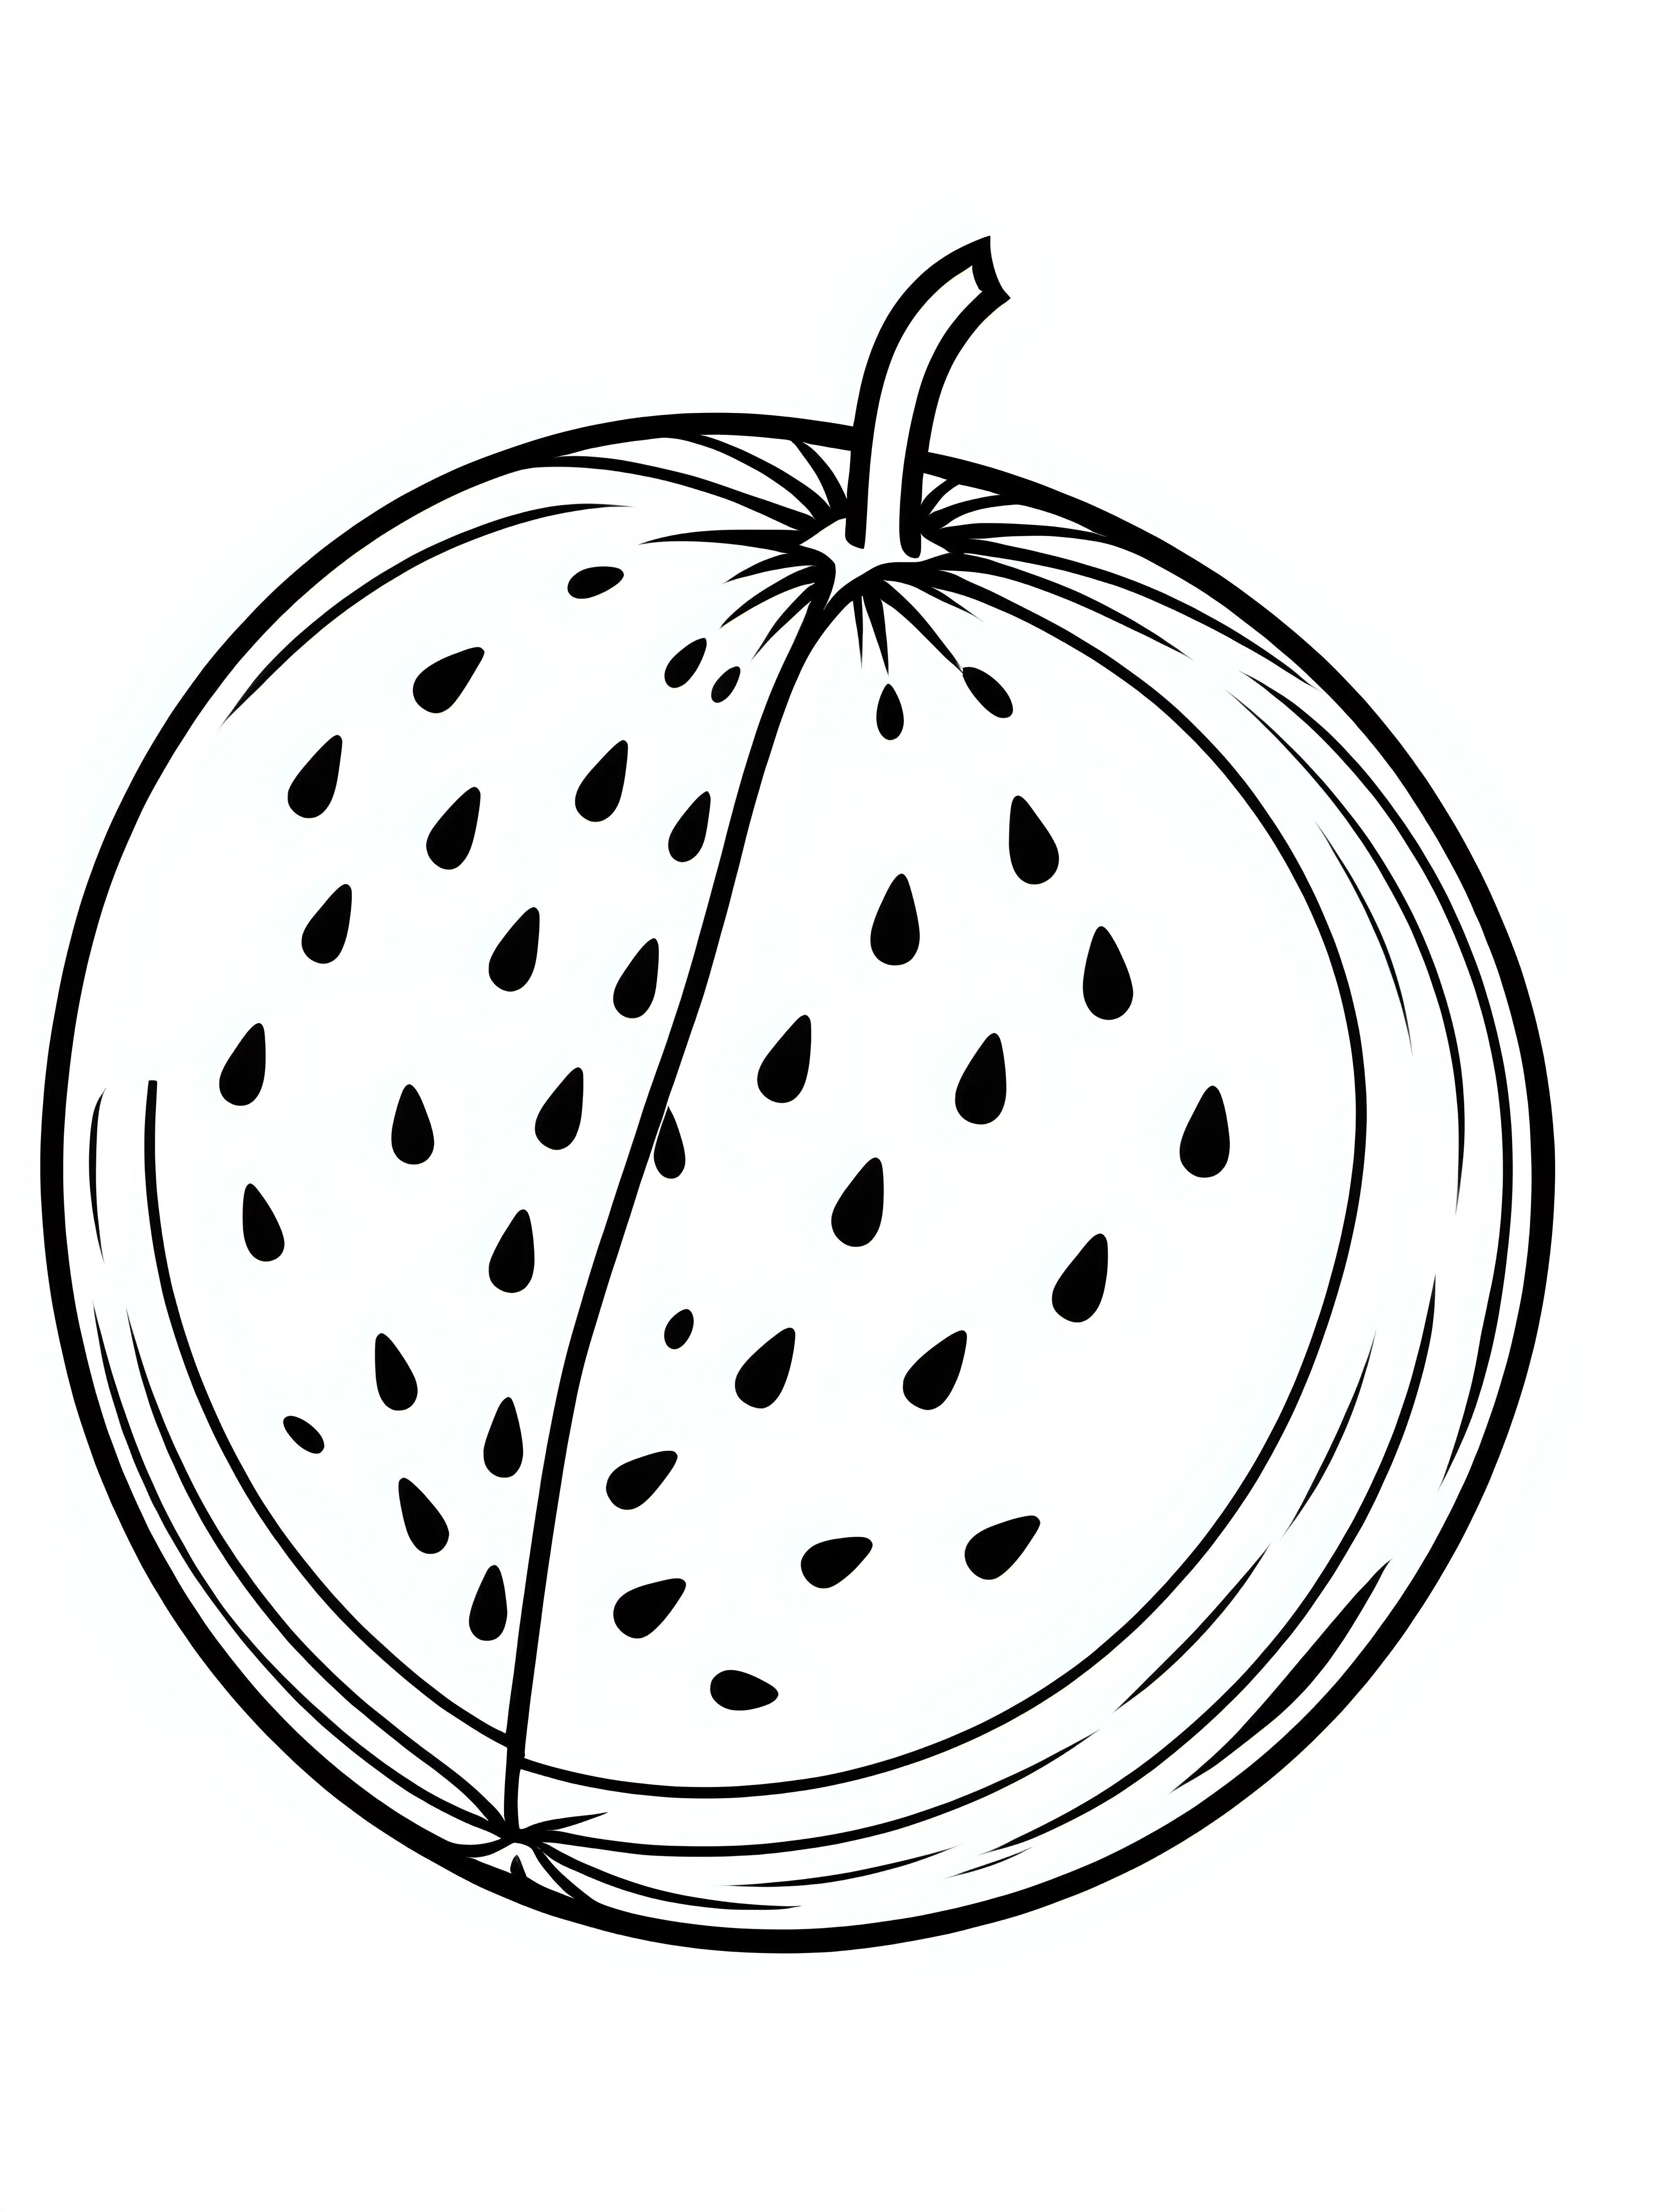 Outline drawing of a watermelon, white background, simple coloring page for kids